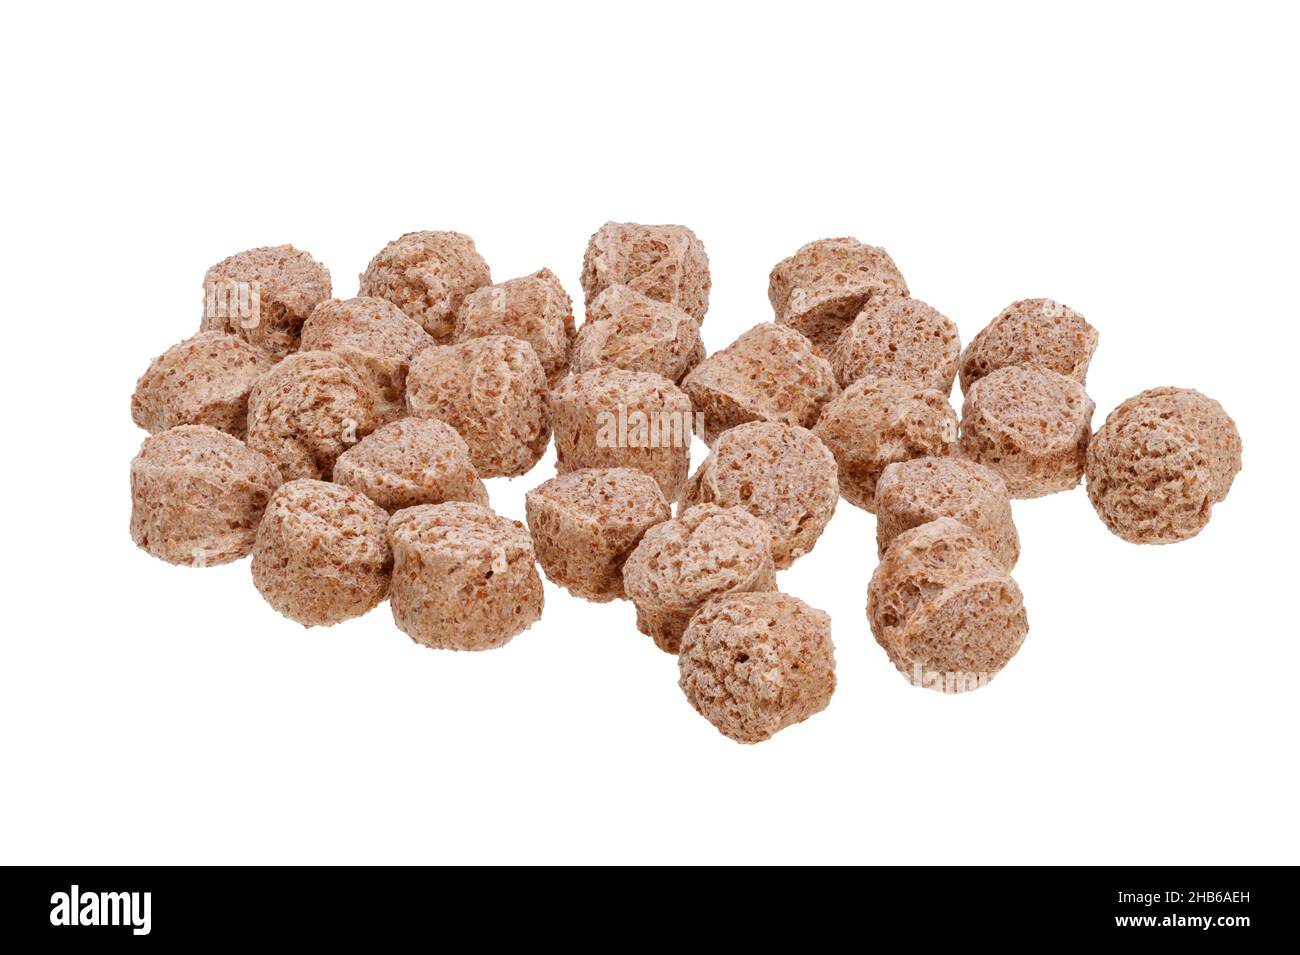 bran in the shape of balls insulated on a white background. High quality photo Stock Photo